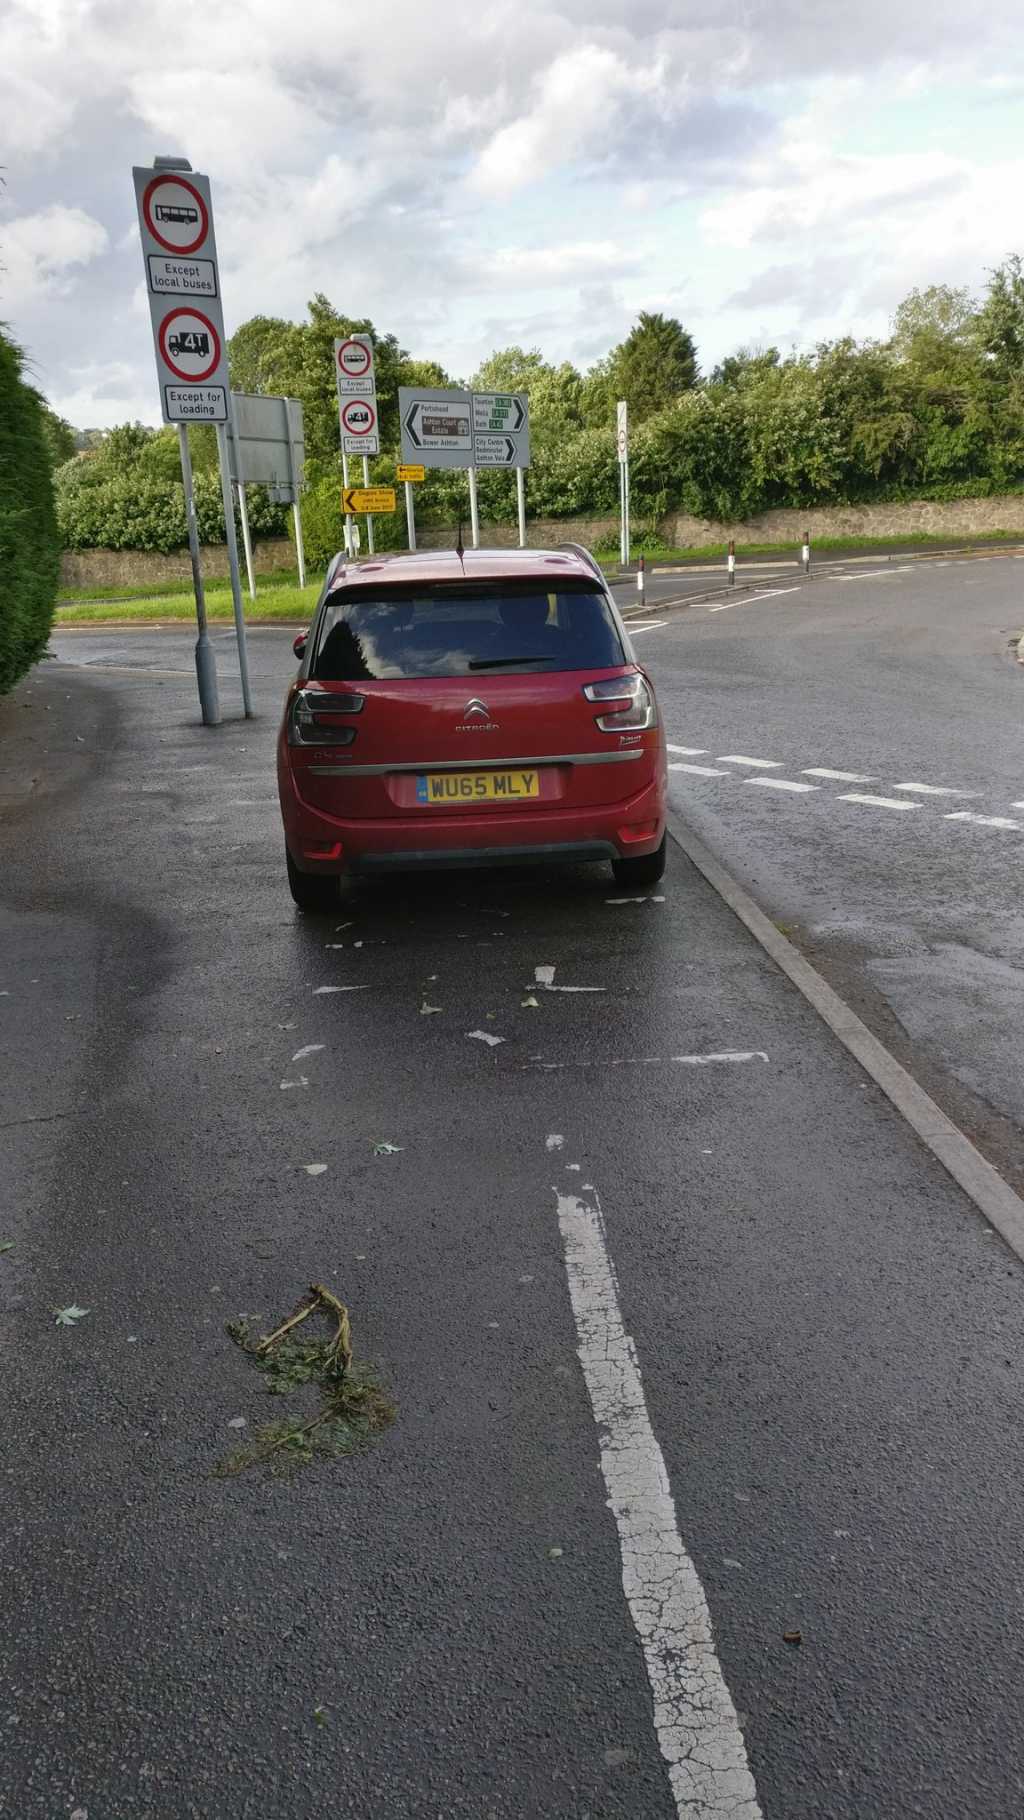 WU65 MLY is an Inconsiderate Parker